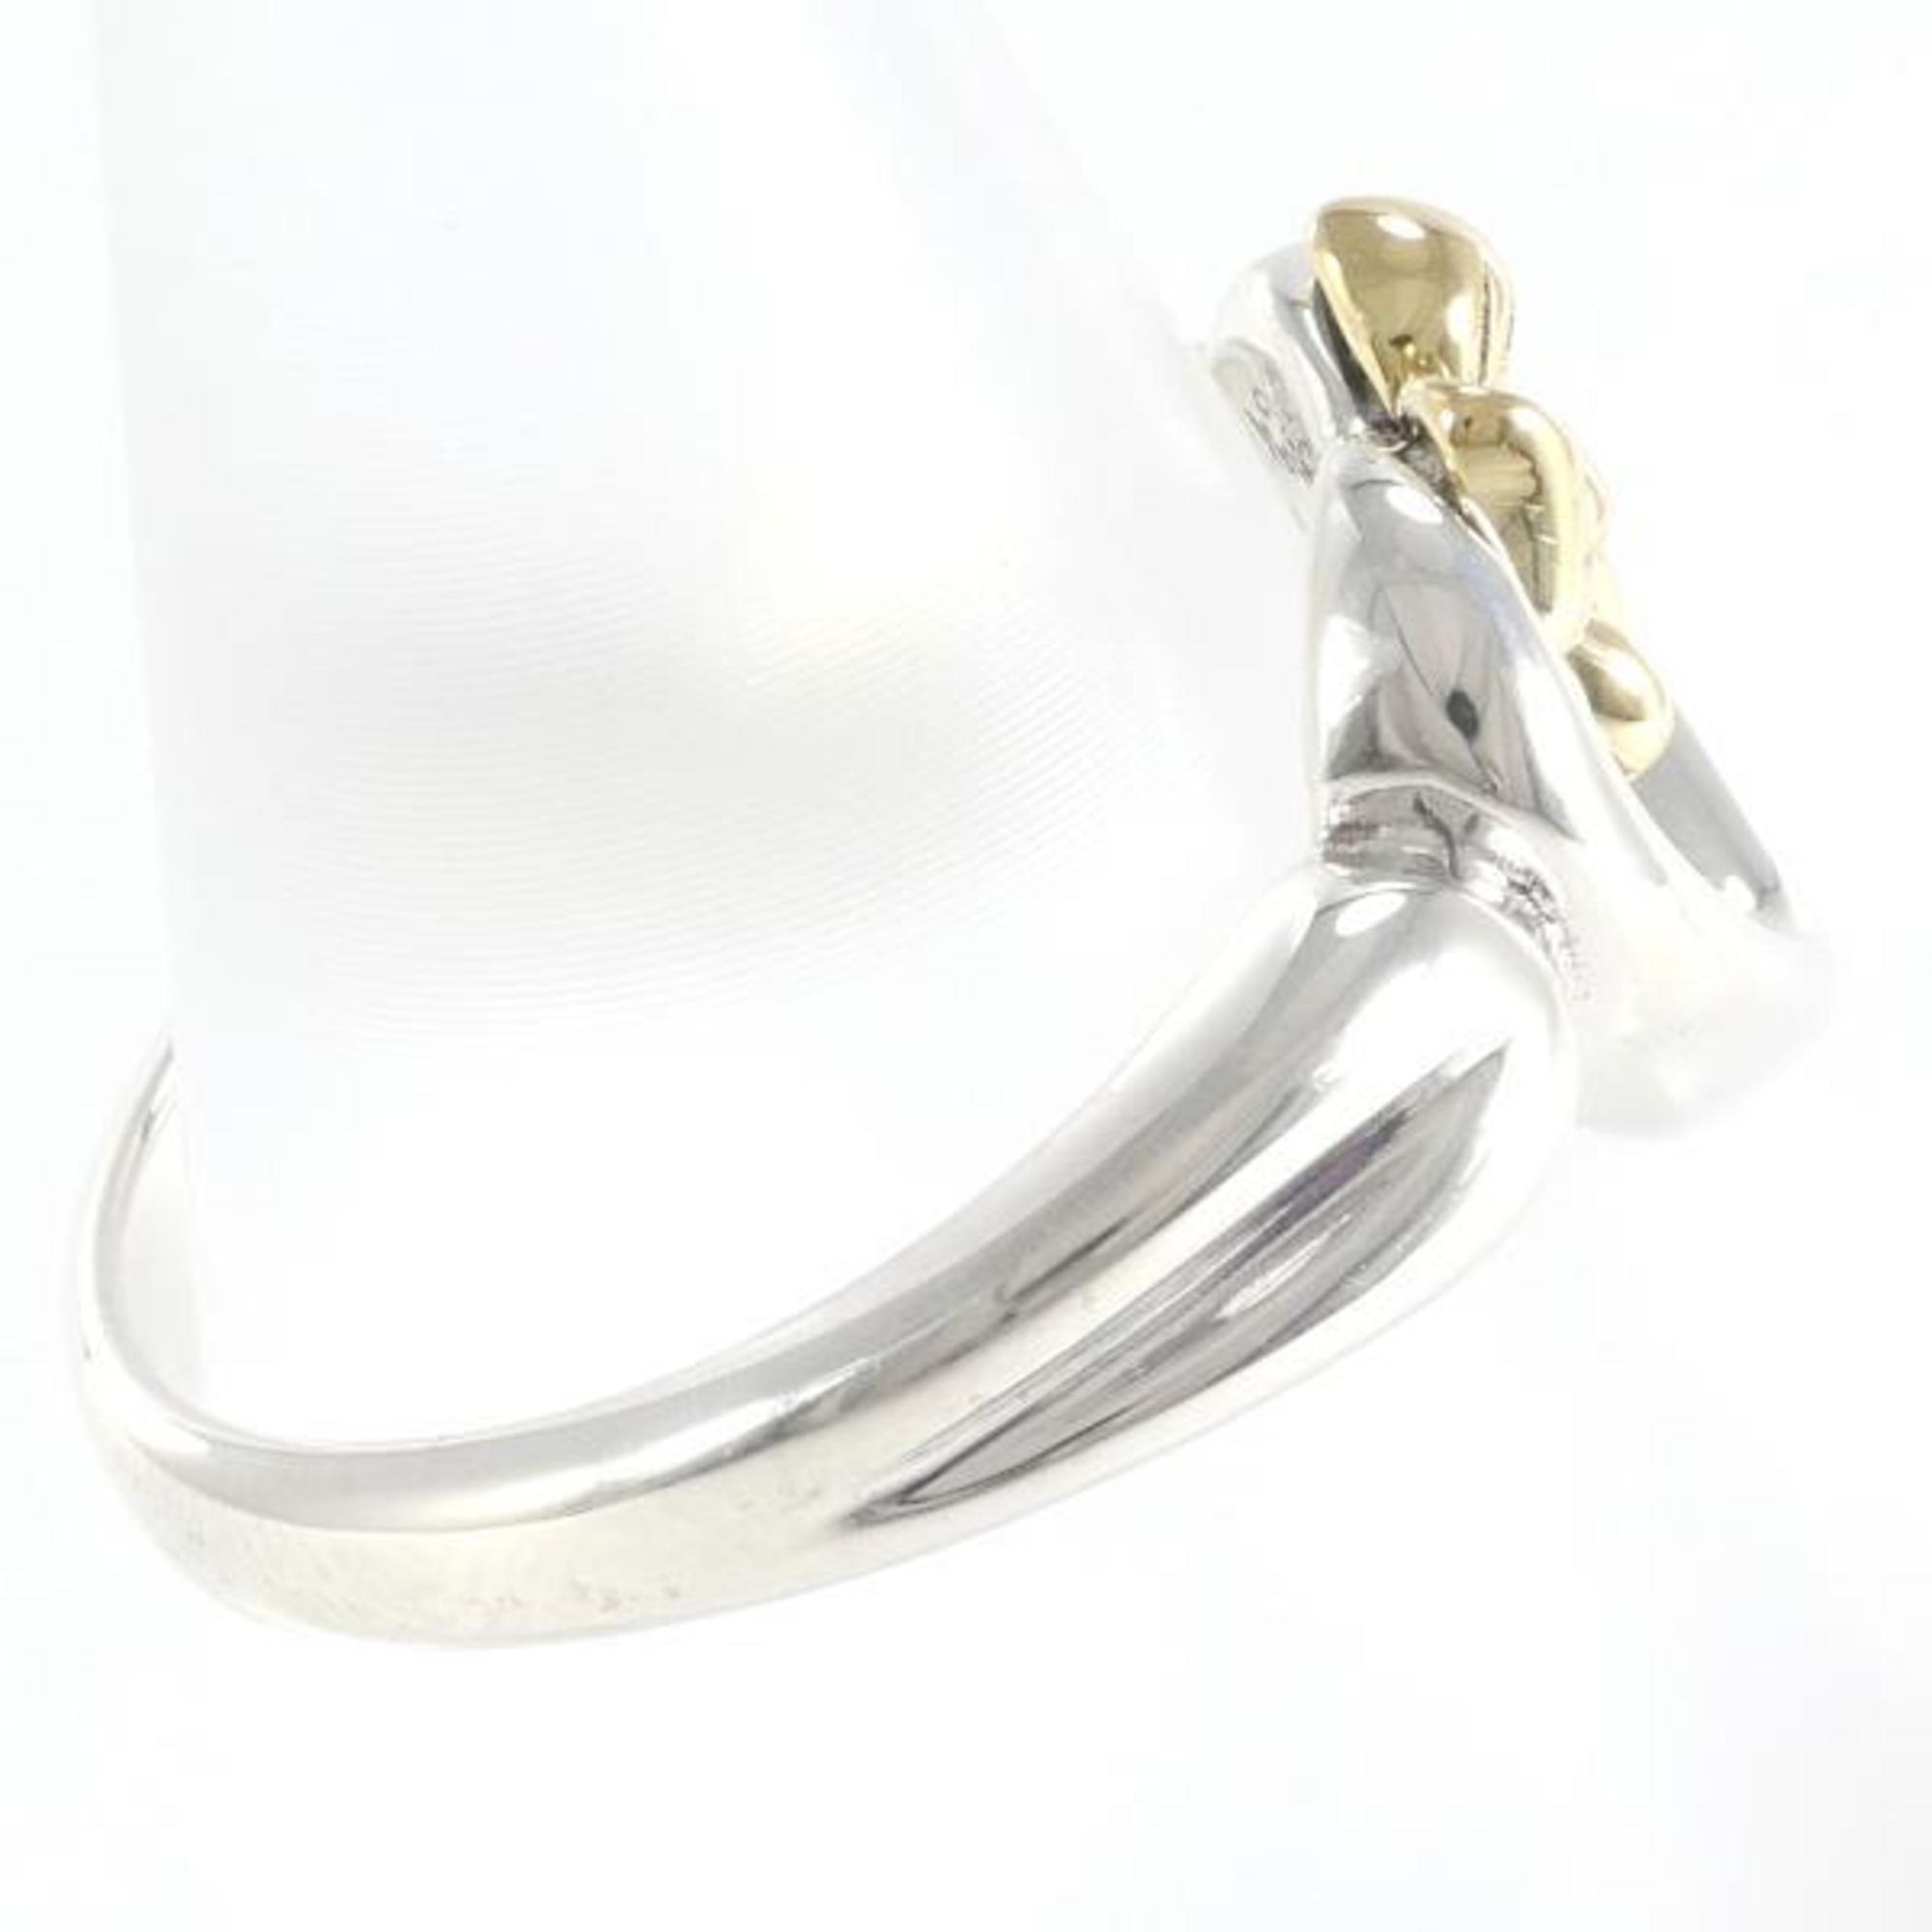 Tiffany Open Heart Ribbon K18YG Silver Ring Size 7.5 Total Weight Approx. 3.4g Jewelry Wrapping Free